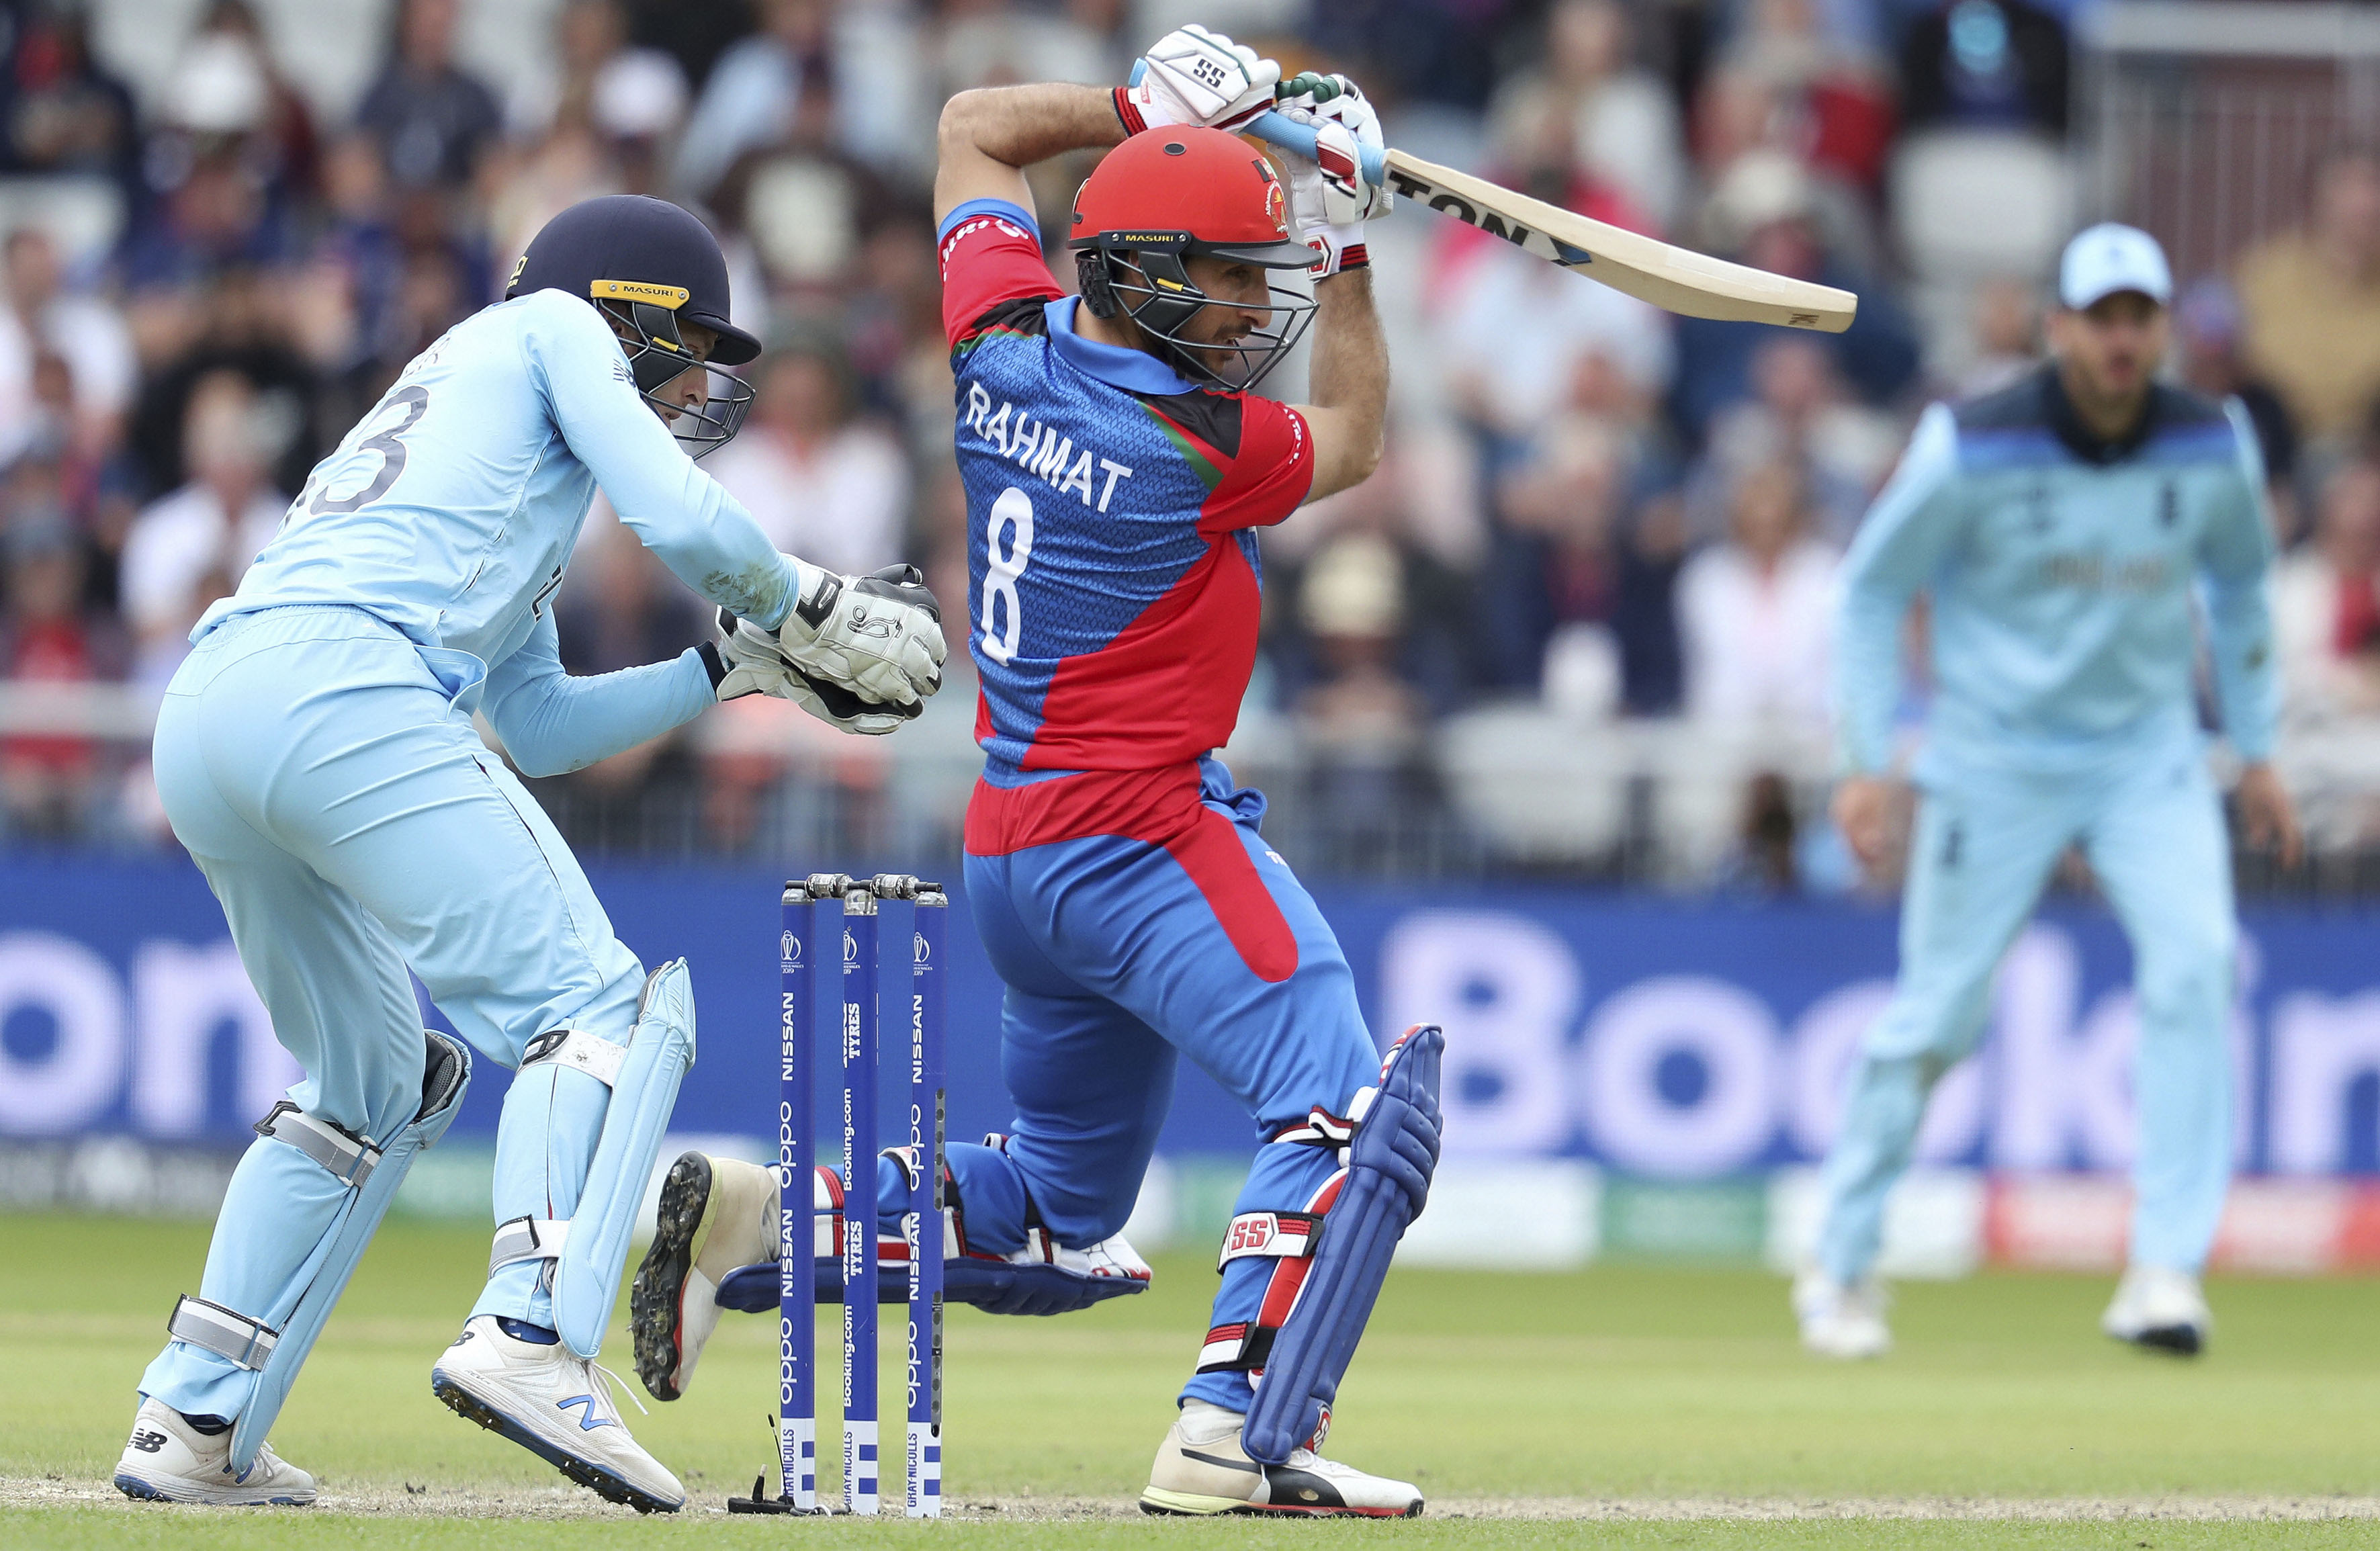 England crushes Afghanistan in a David vs Goliath fight